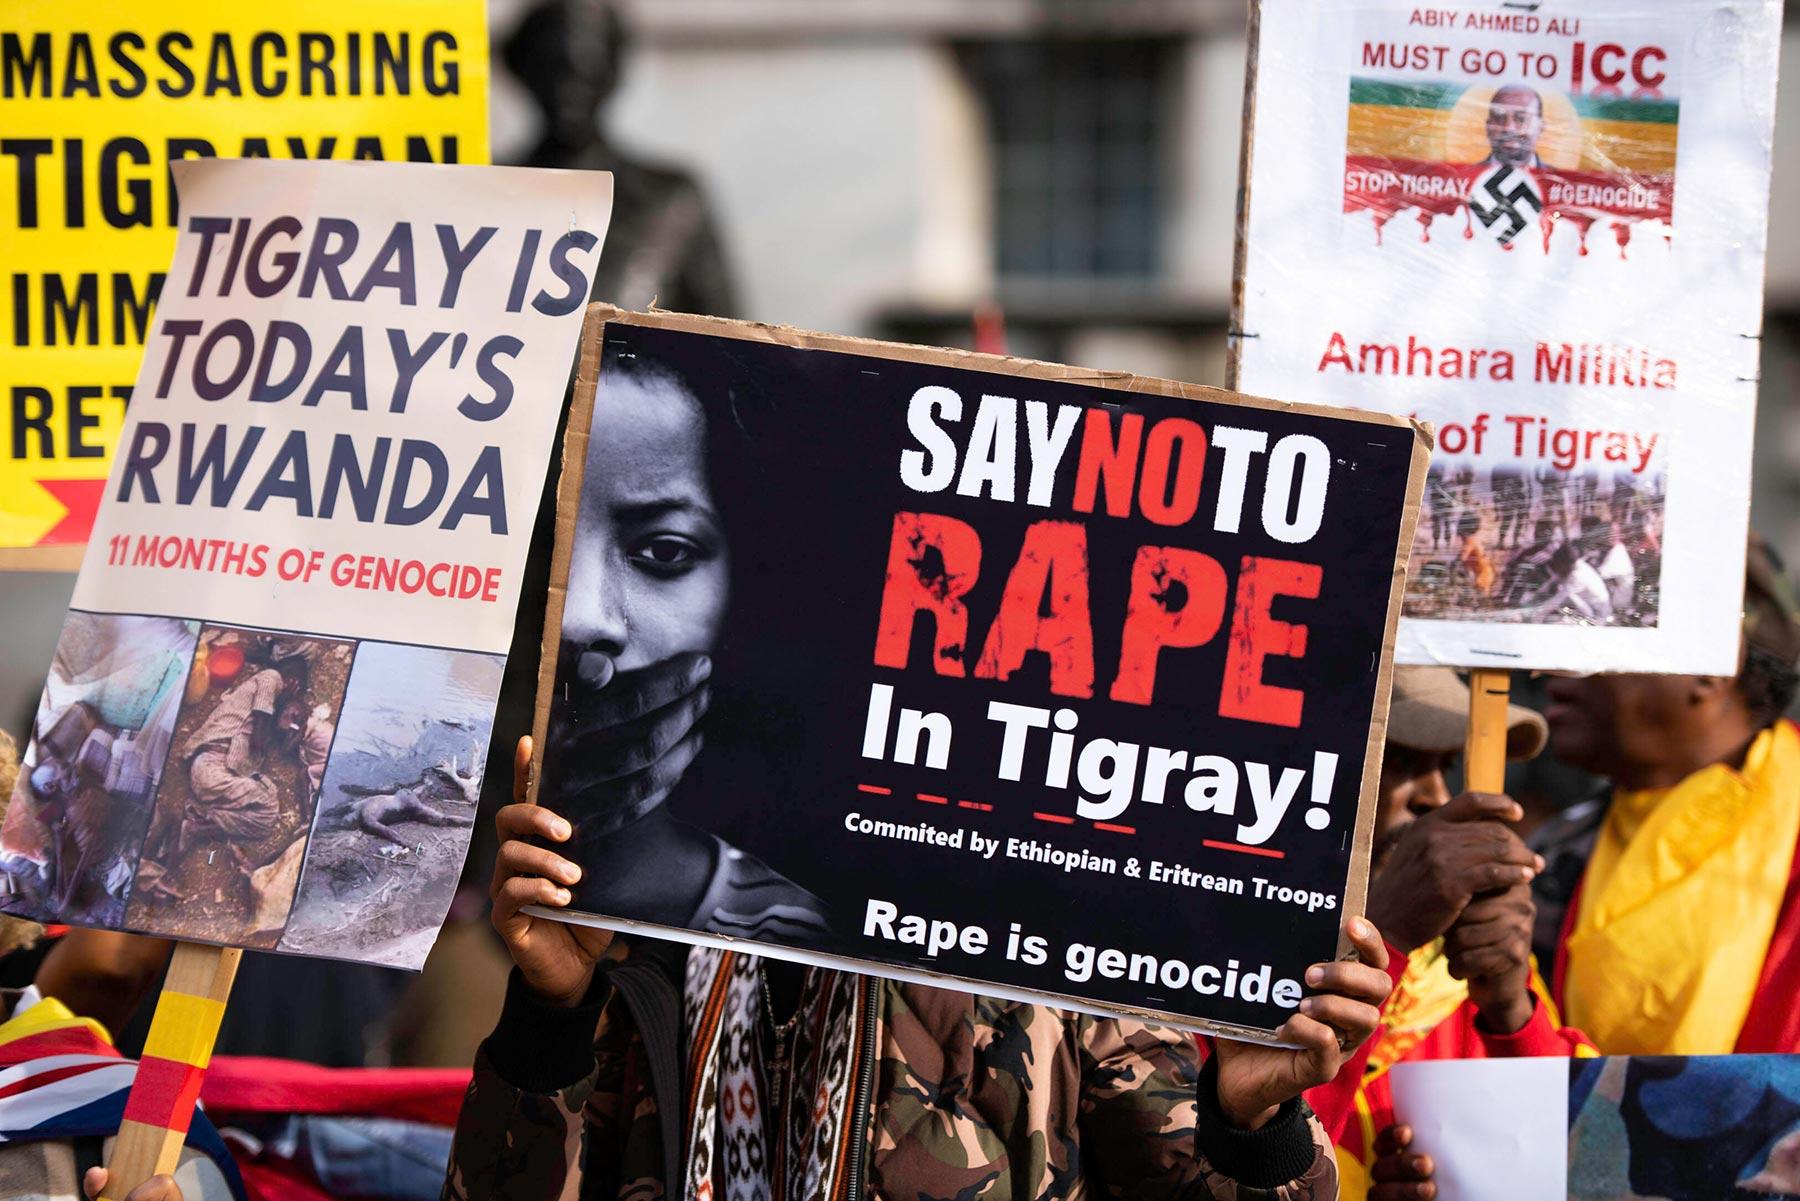 Ethiopia’s Civil War: New Report on Sexual Violence and Ethnic Cleansing in Tigray Region